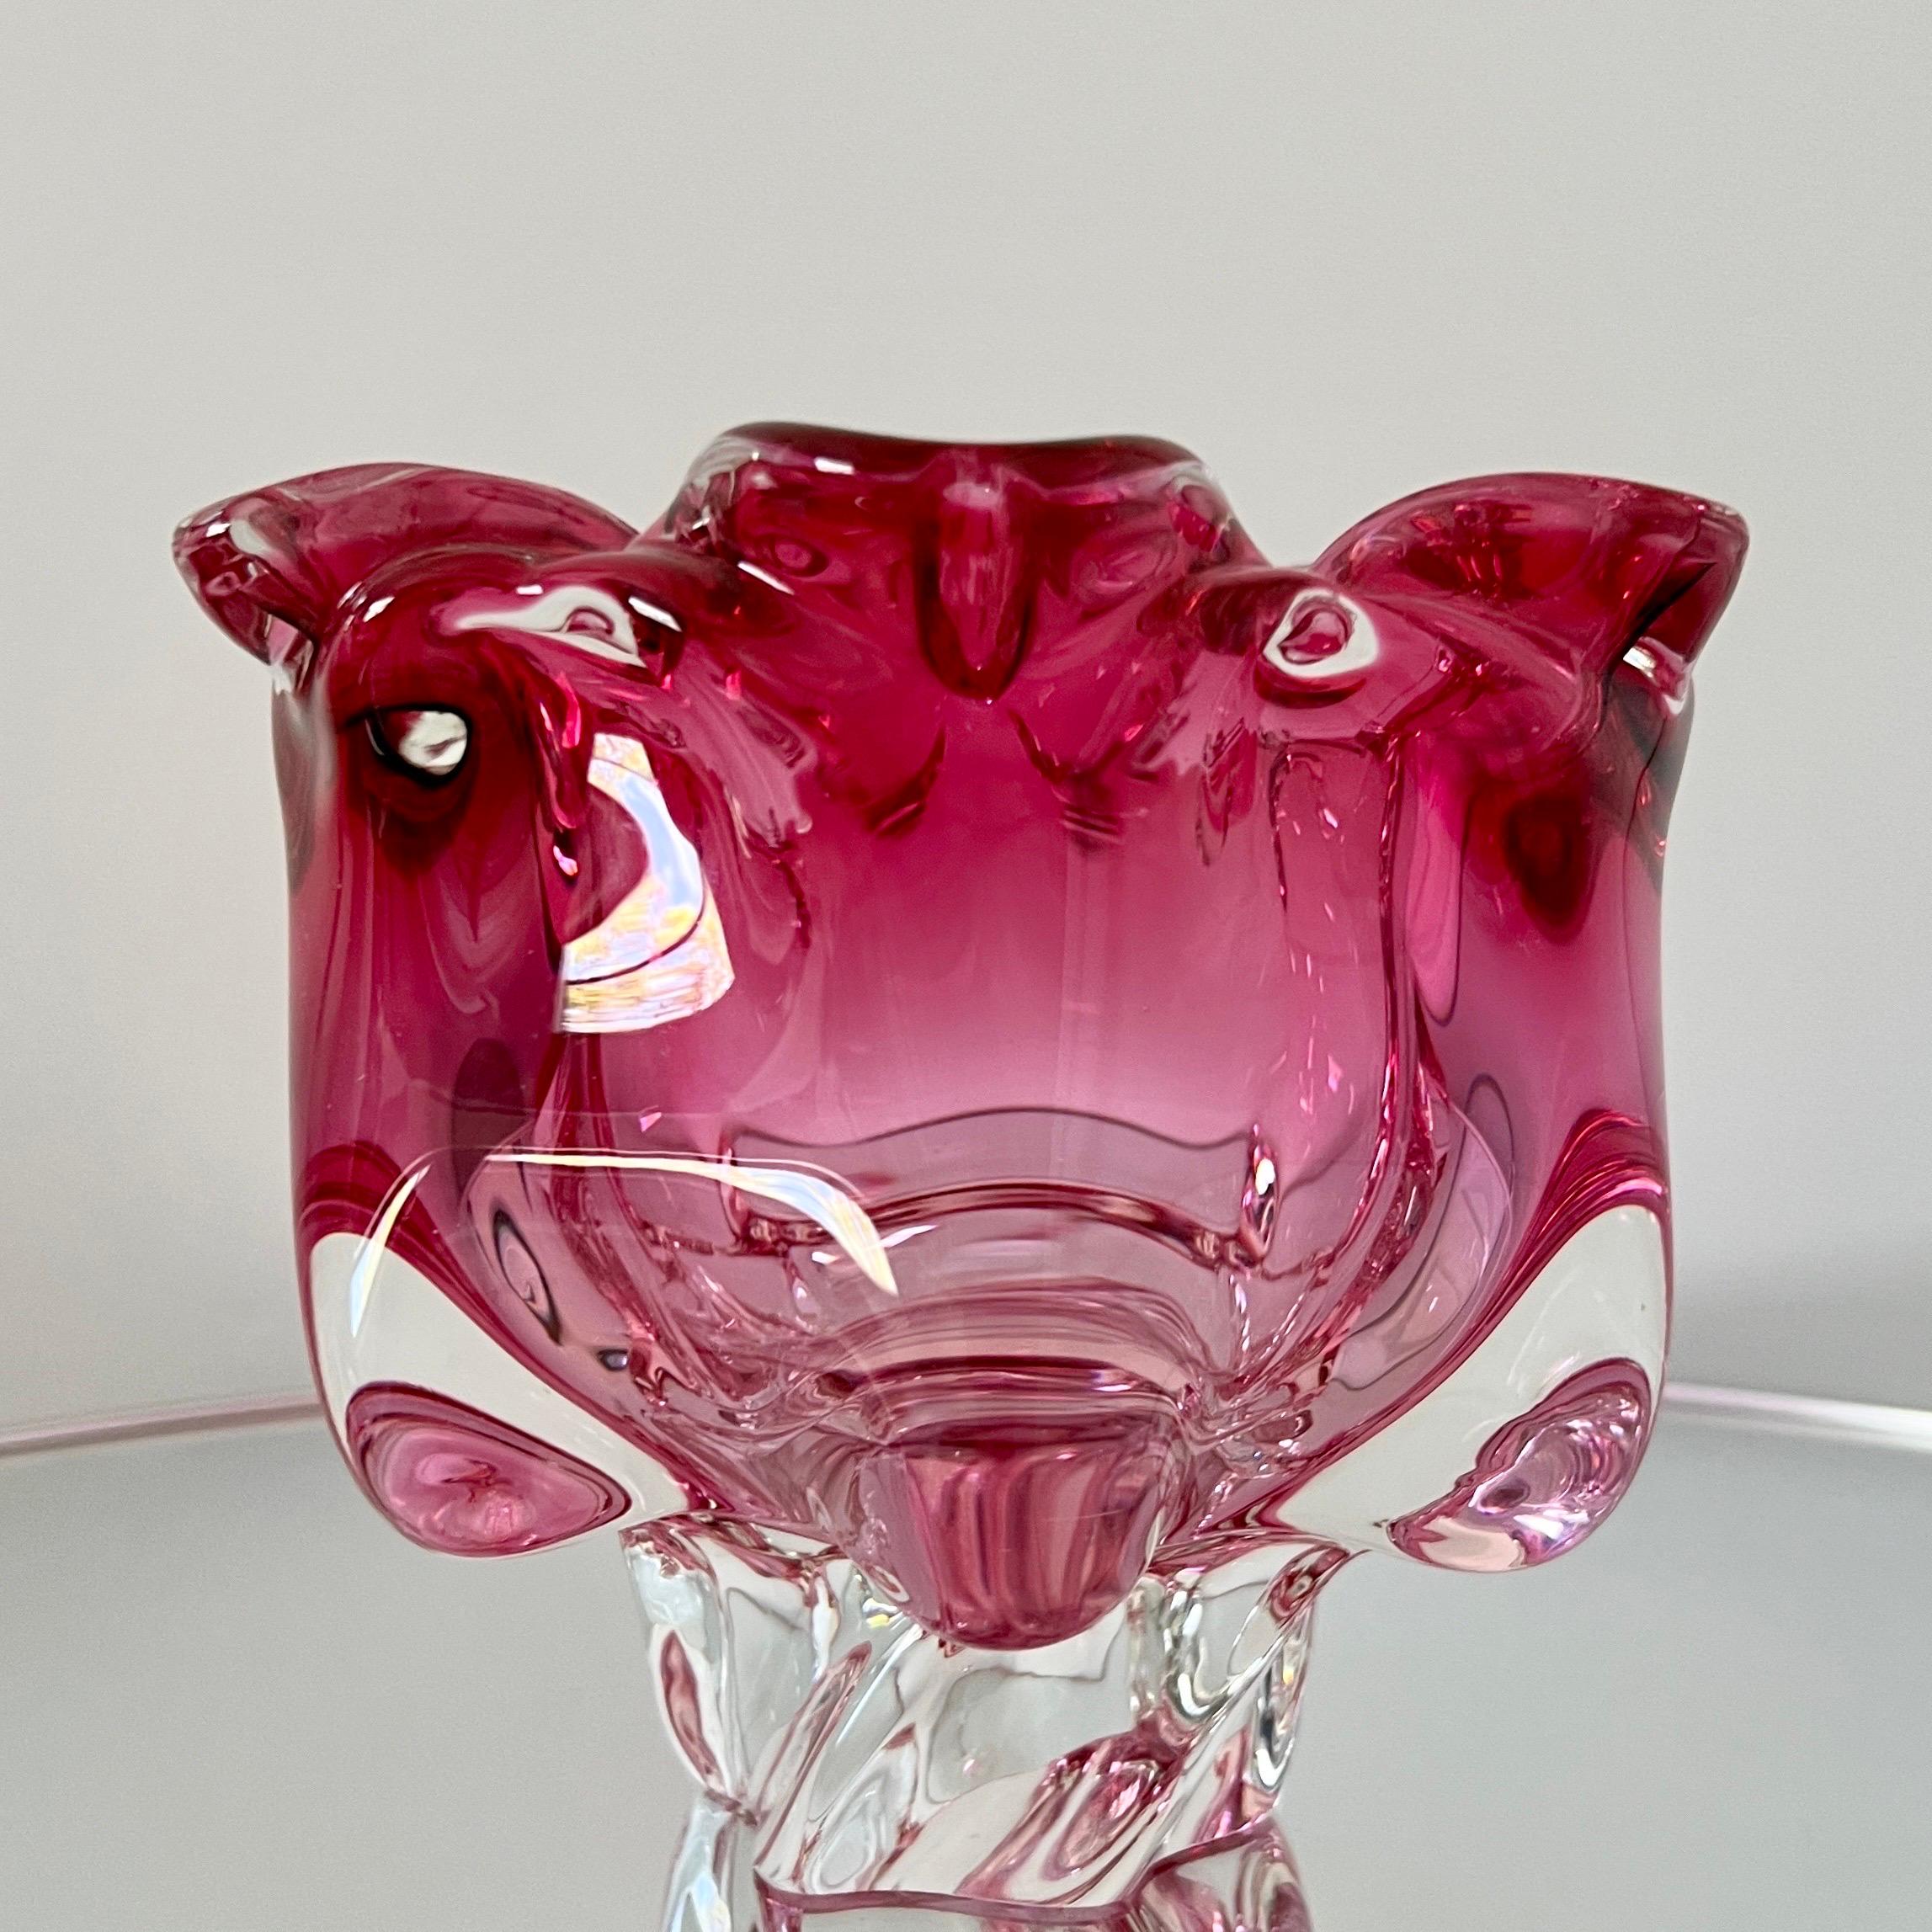 Mid-Century Modern large footed bowl or vase in pink fuchsia Murano glass. hand blown using Sommerso technique whereby the pink glass is submerged within the clear glass. Features a stylized floral design with curved sides and a slanted base in